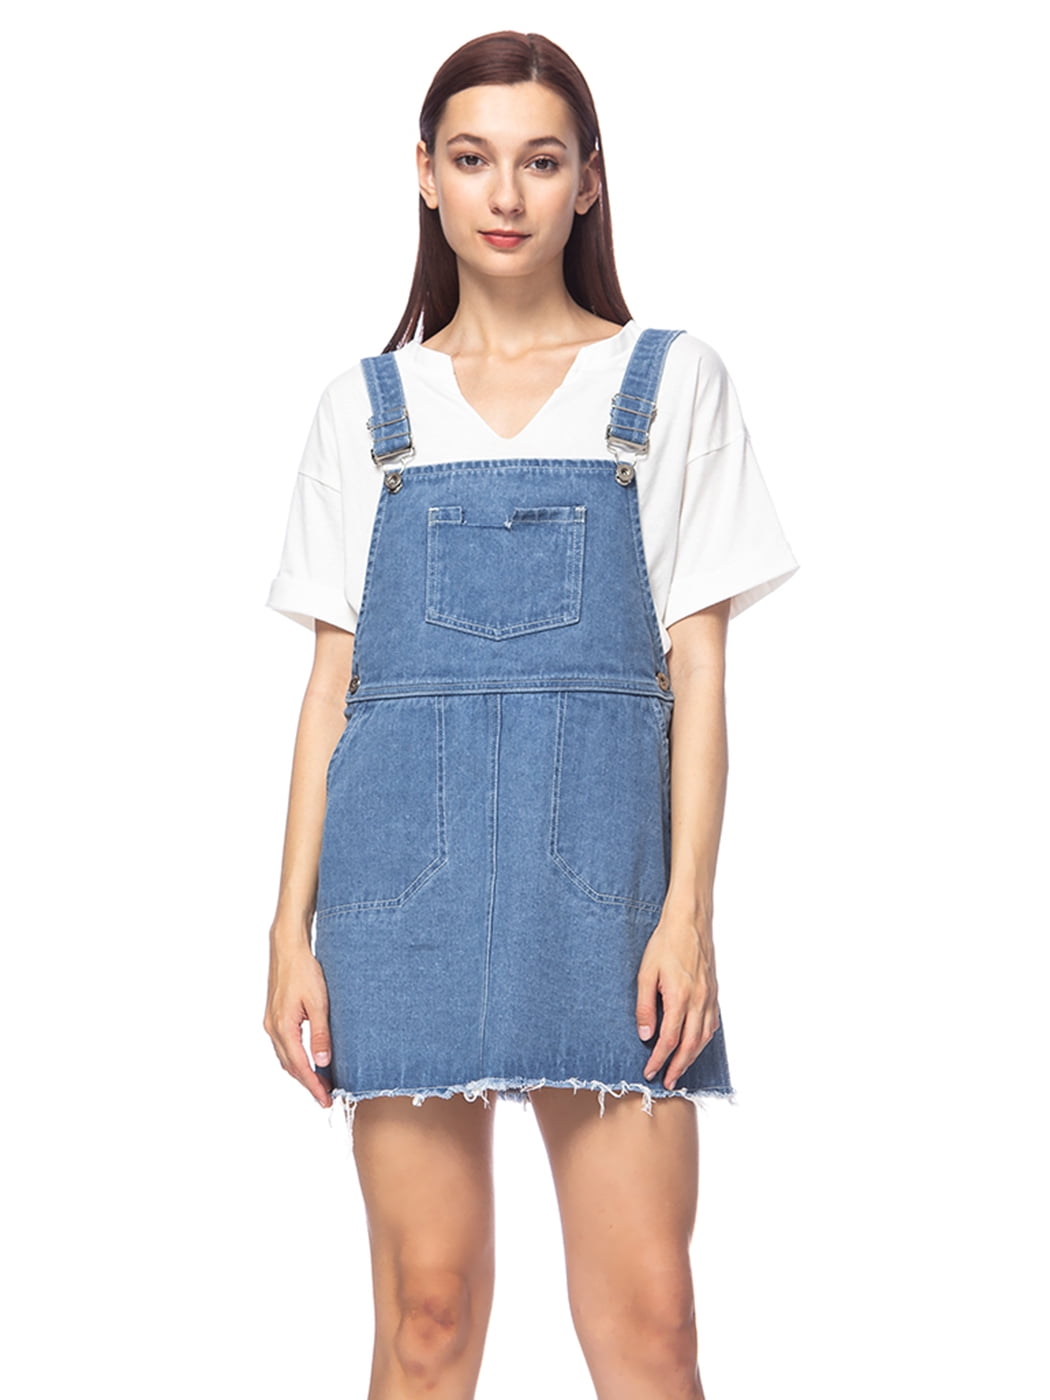 the overall dress